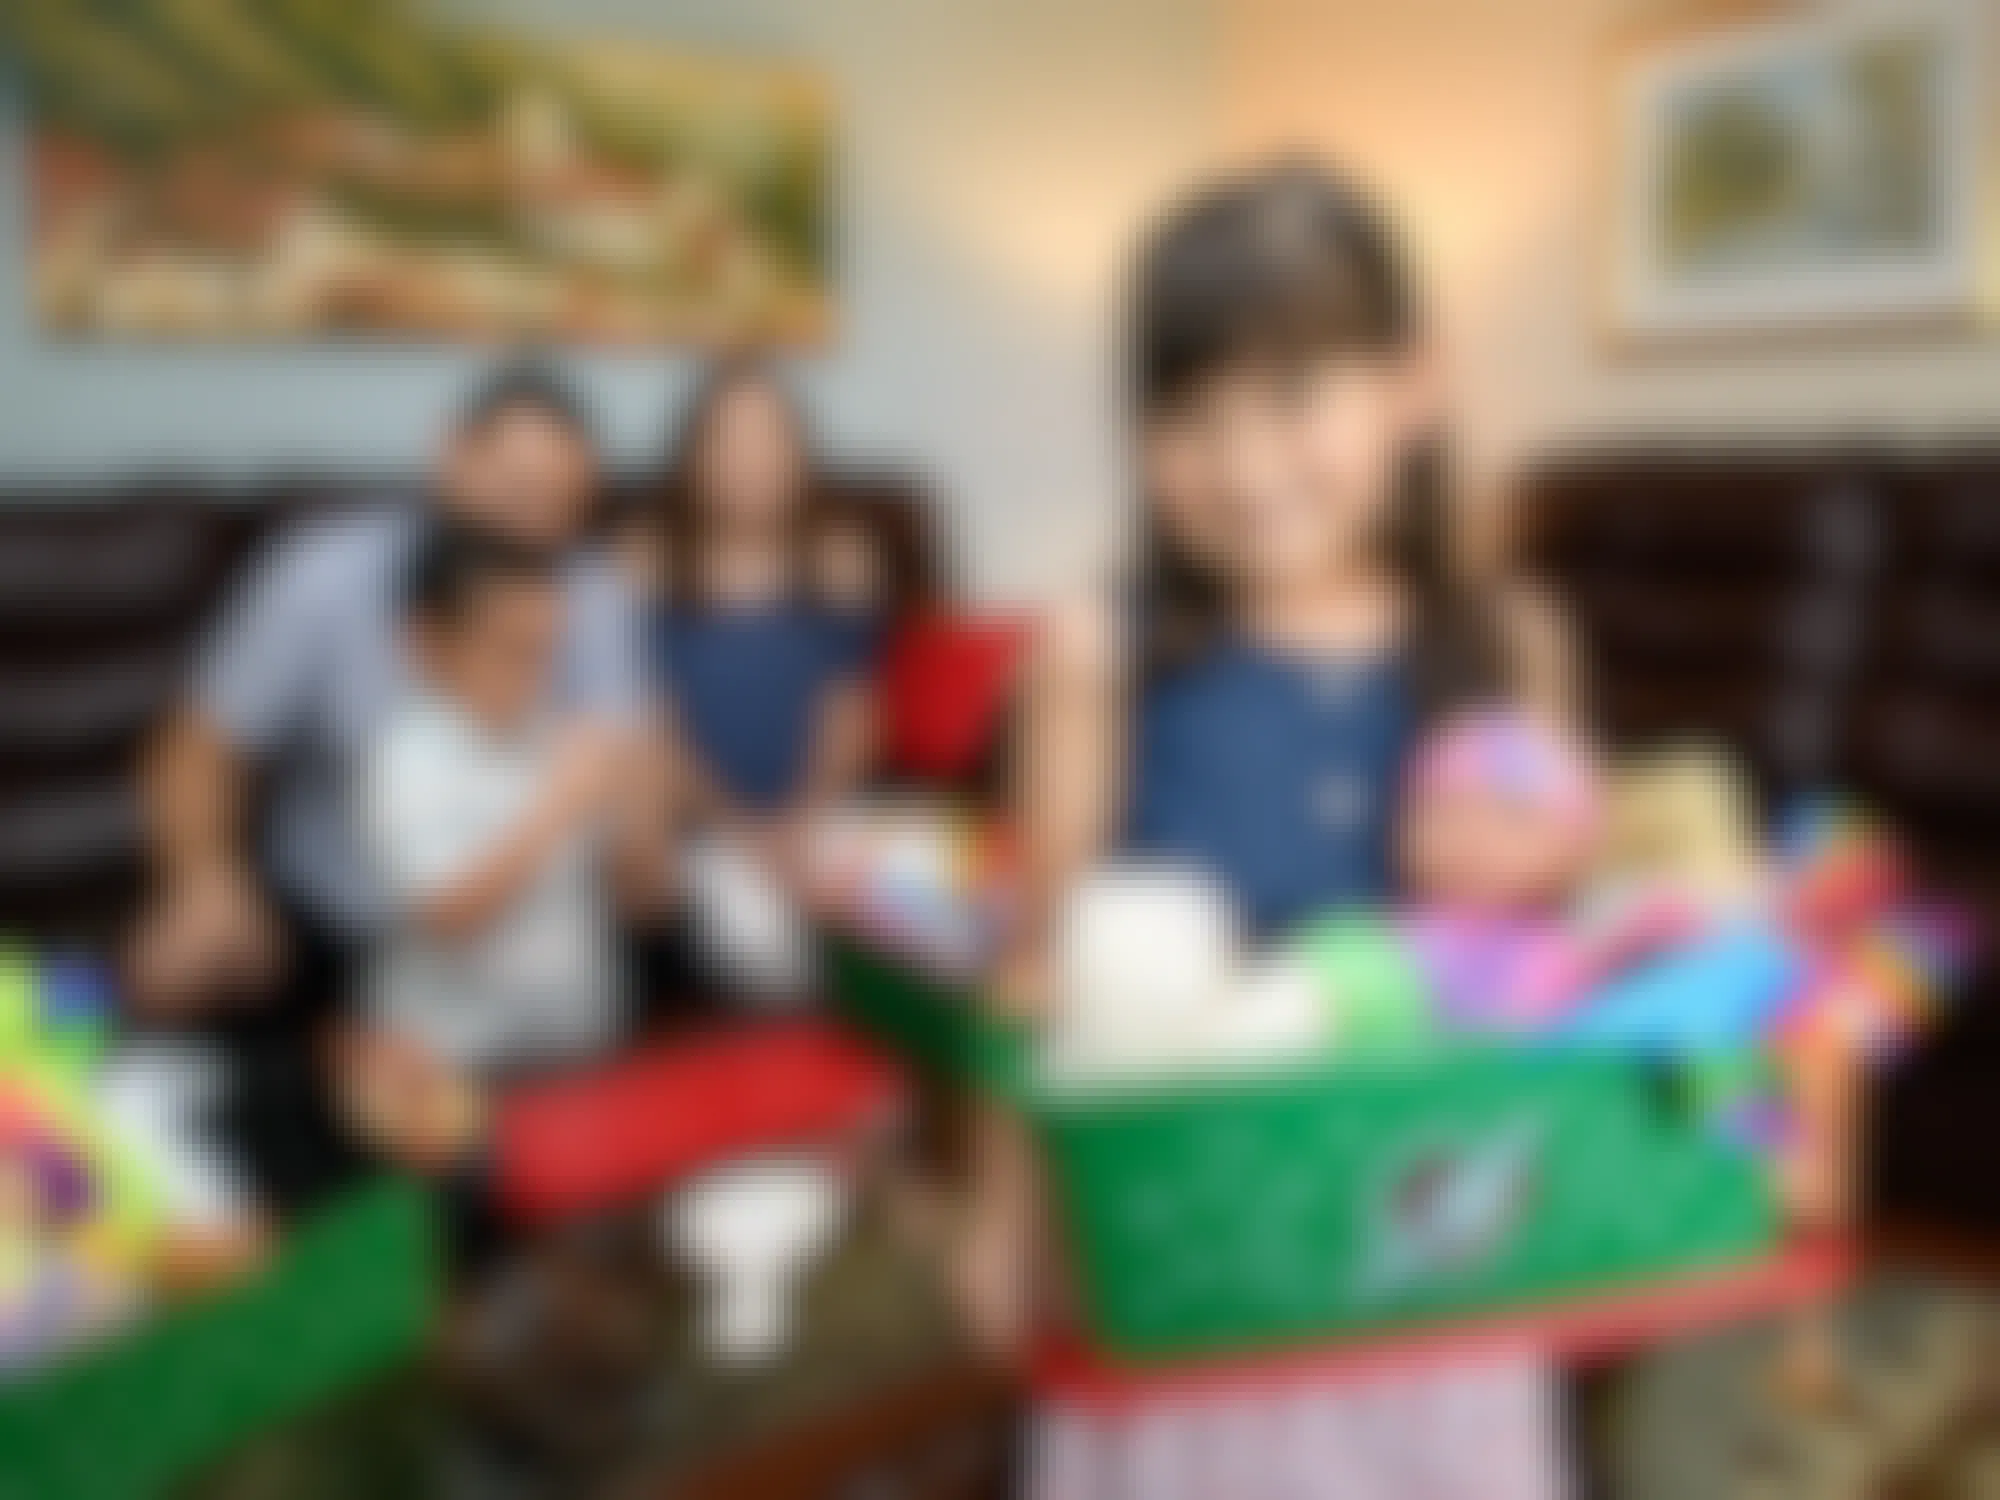 A child opening up a gift box from Operation Christmas Child in a living room with her family